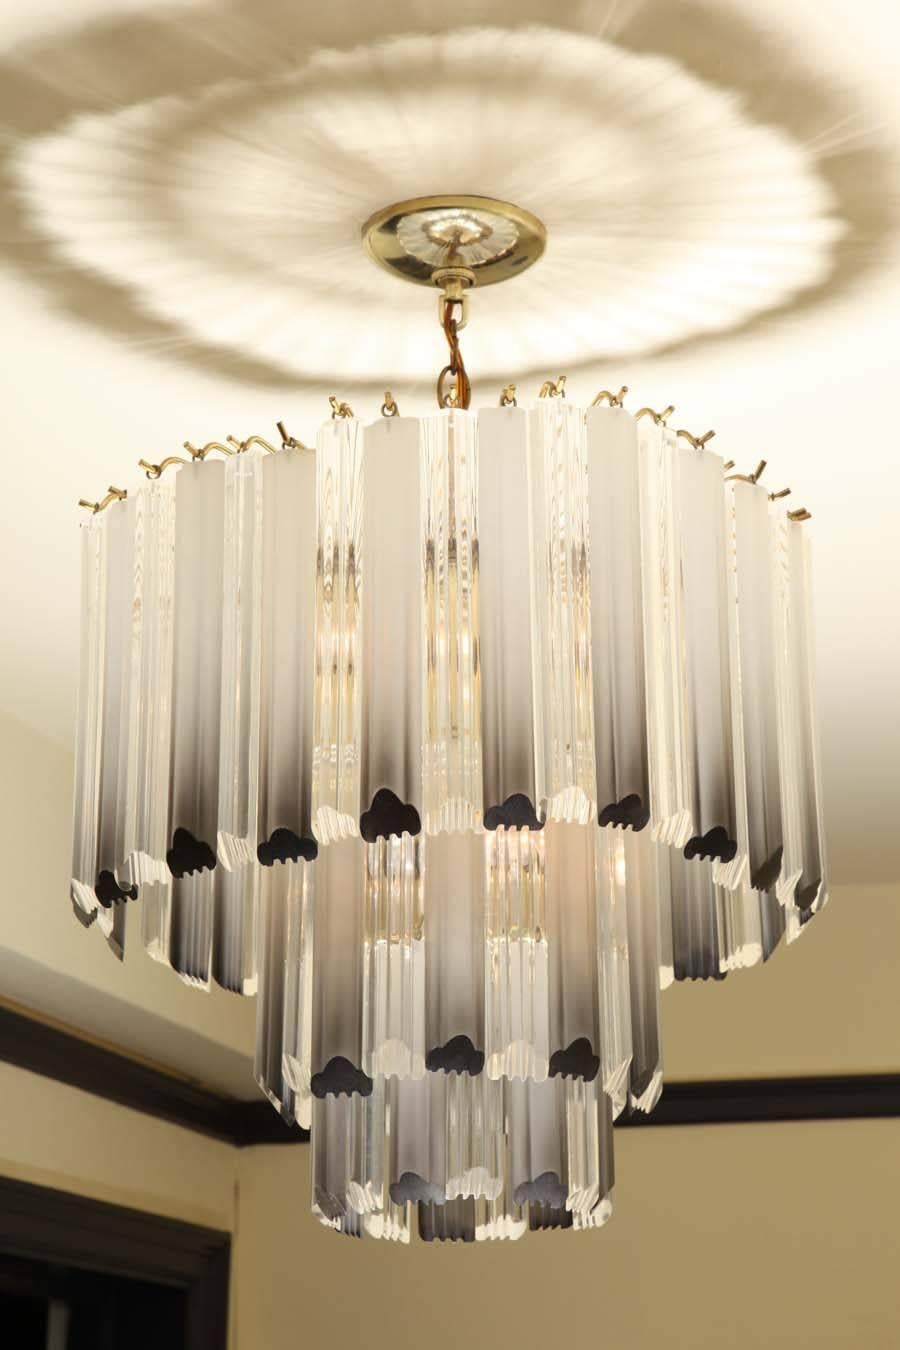 With clear and smoked lucite pendants arranged in three graduating tiers.